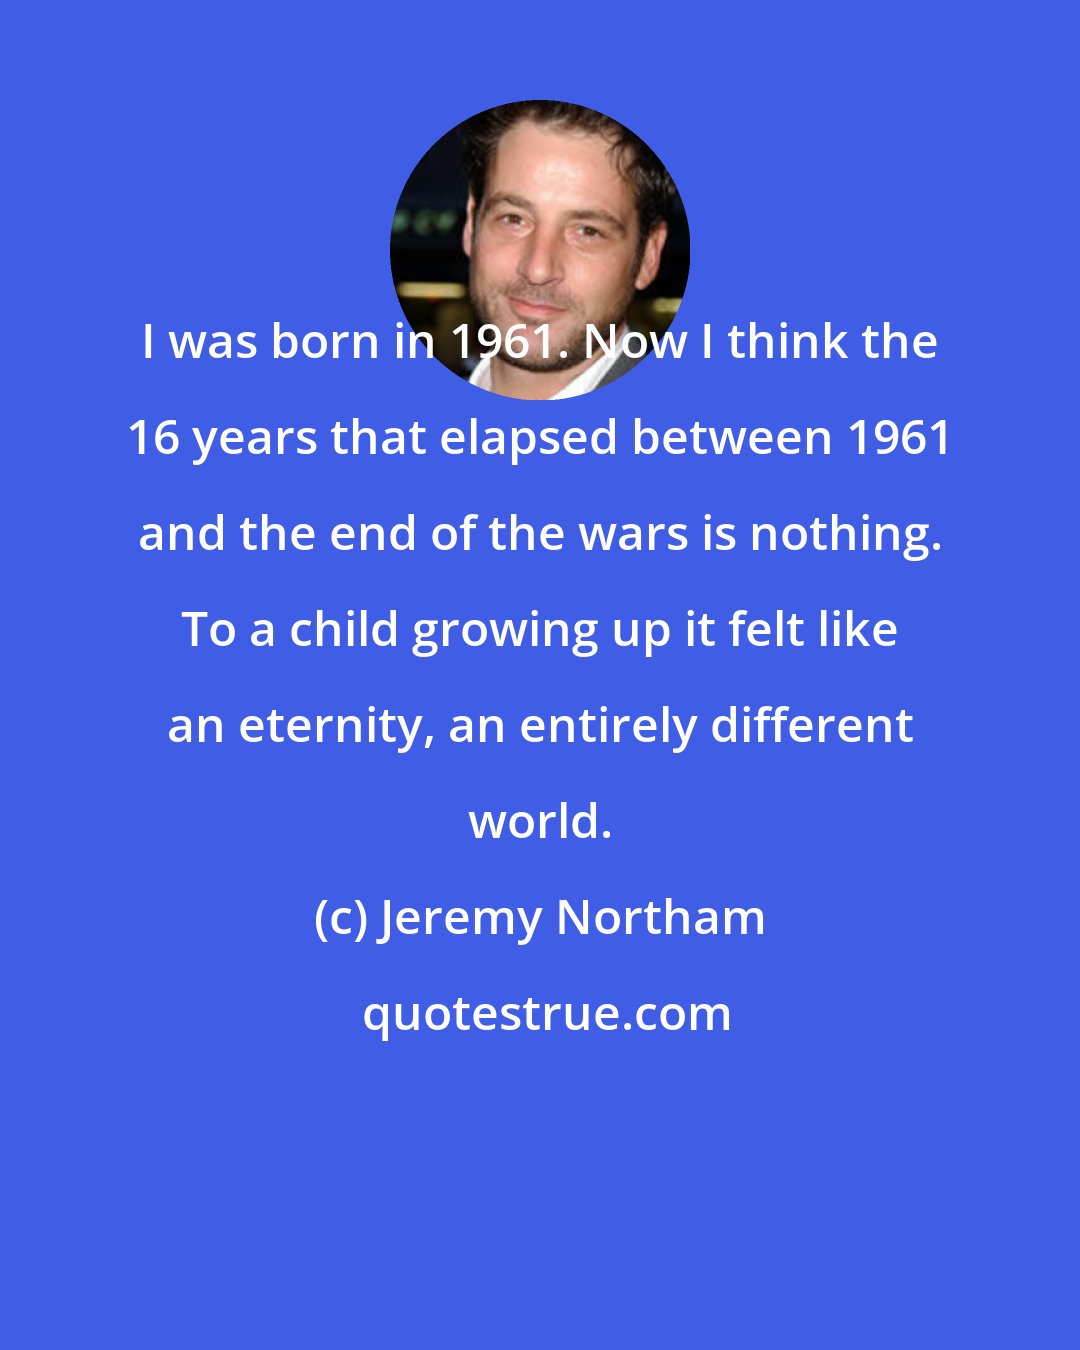 Jeremy Northam: I was born in 1961. Now I think the 16 years that elapsed between 1961 and the end of the wars is nothing. To a child growing up it felt like an eternity, an entirely different world.